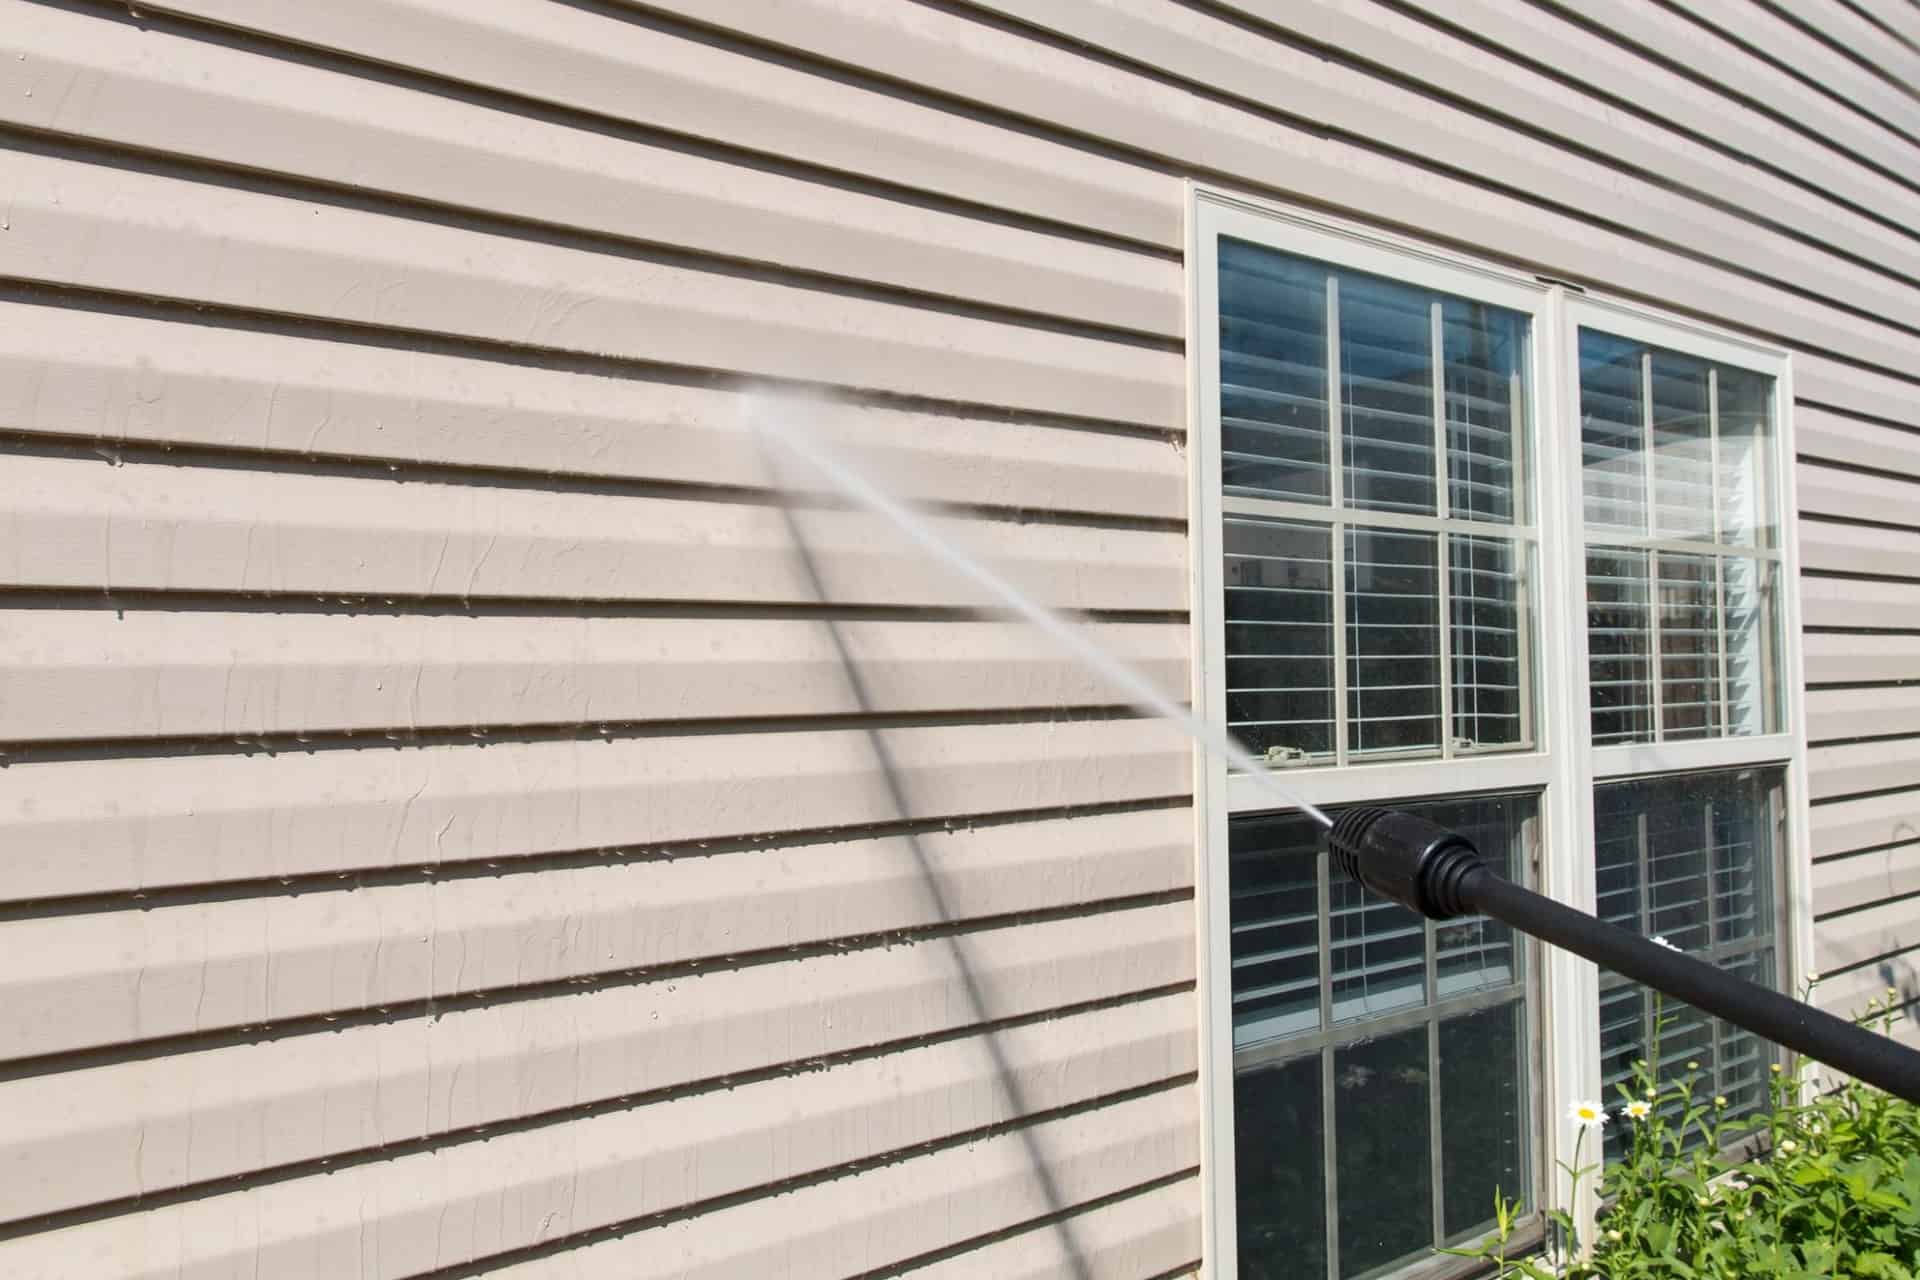 How To Clean Steel Siding